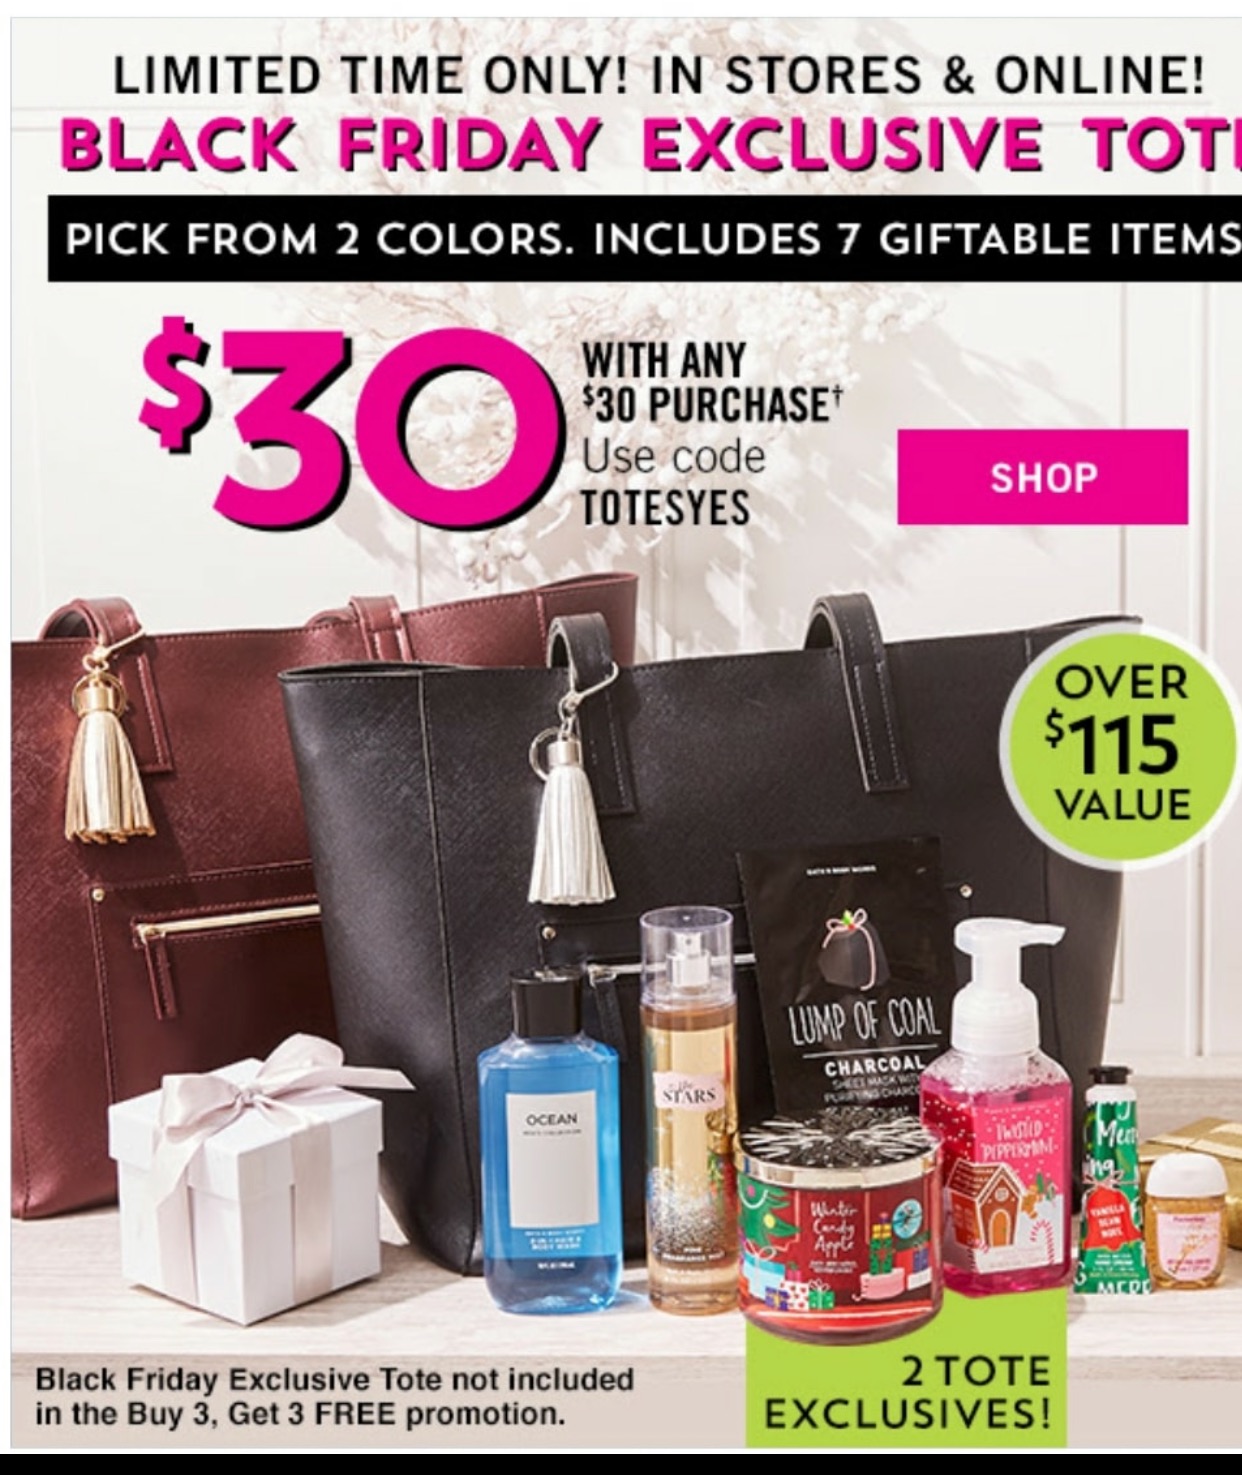 bath and body works online